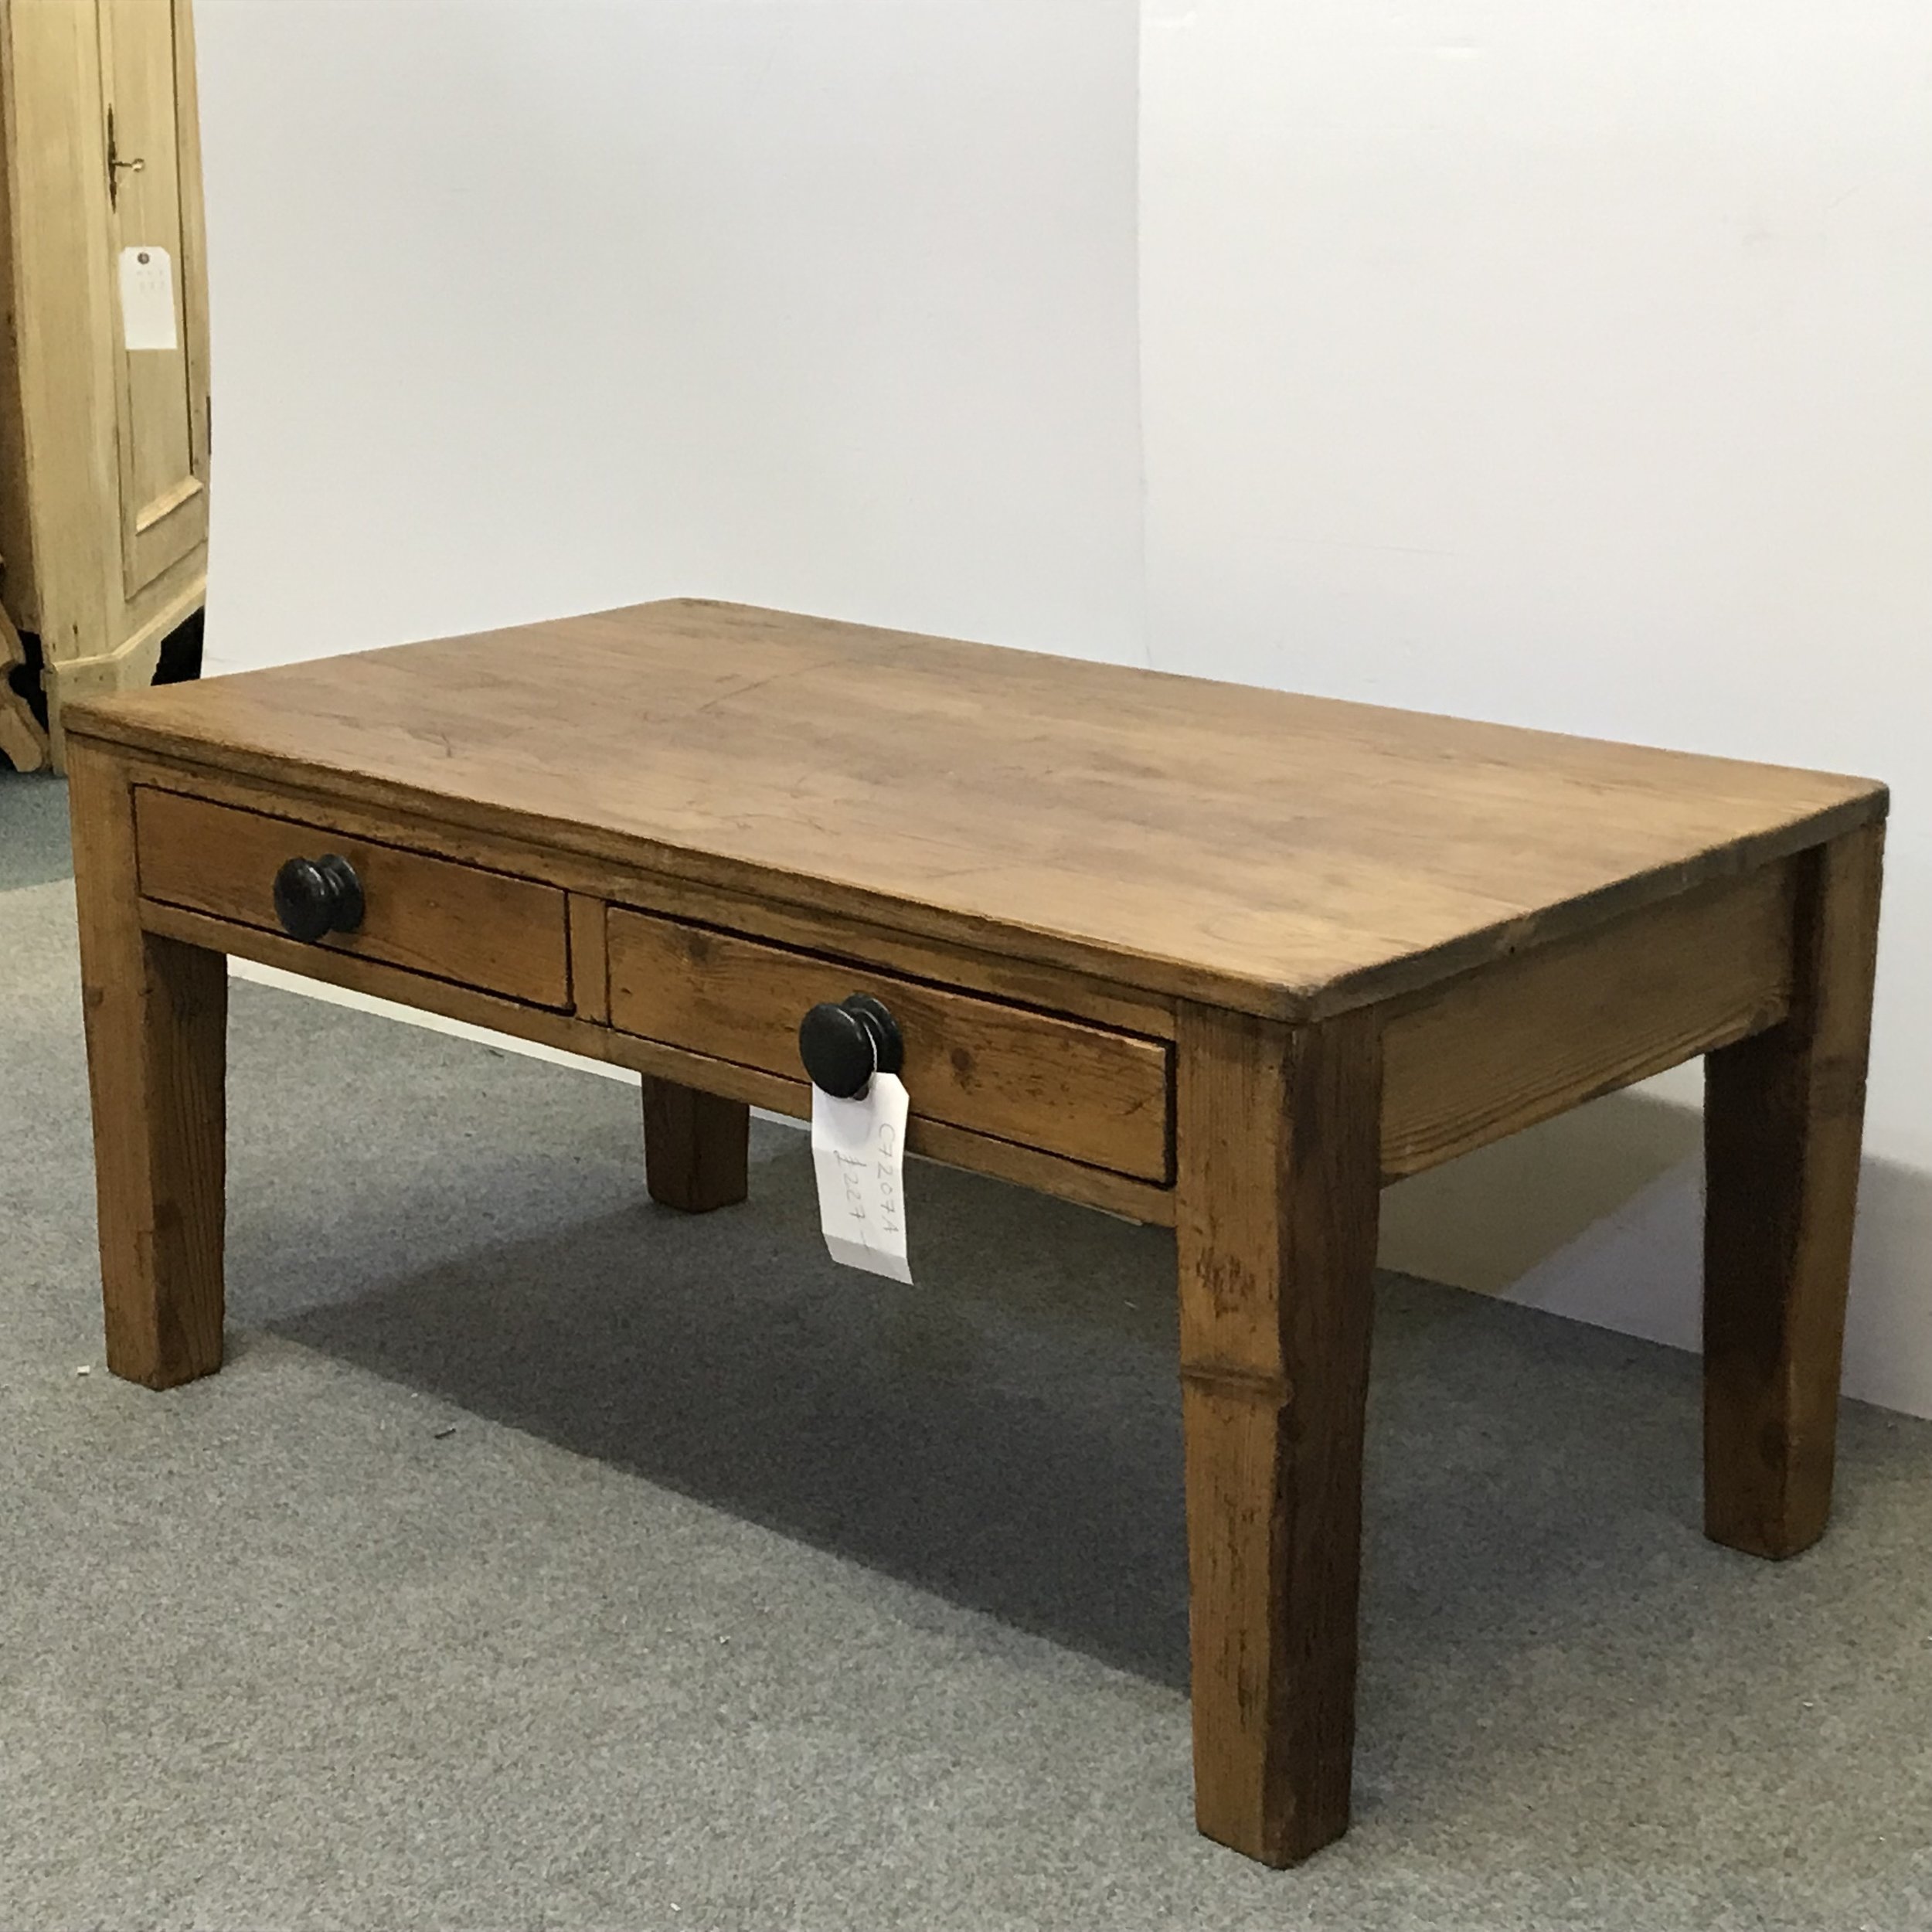 Coffee table with tapered legs